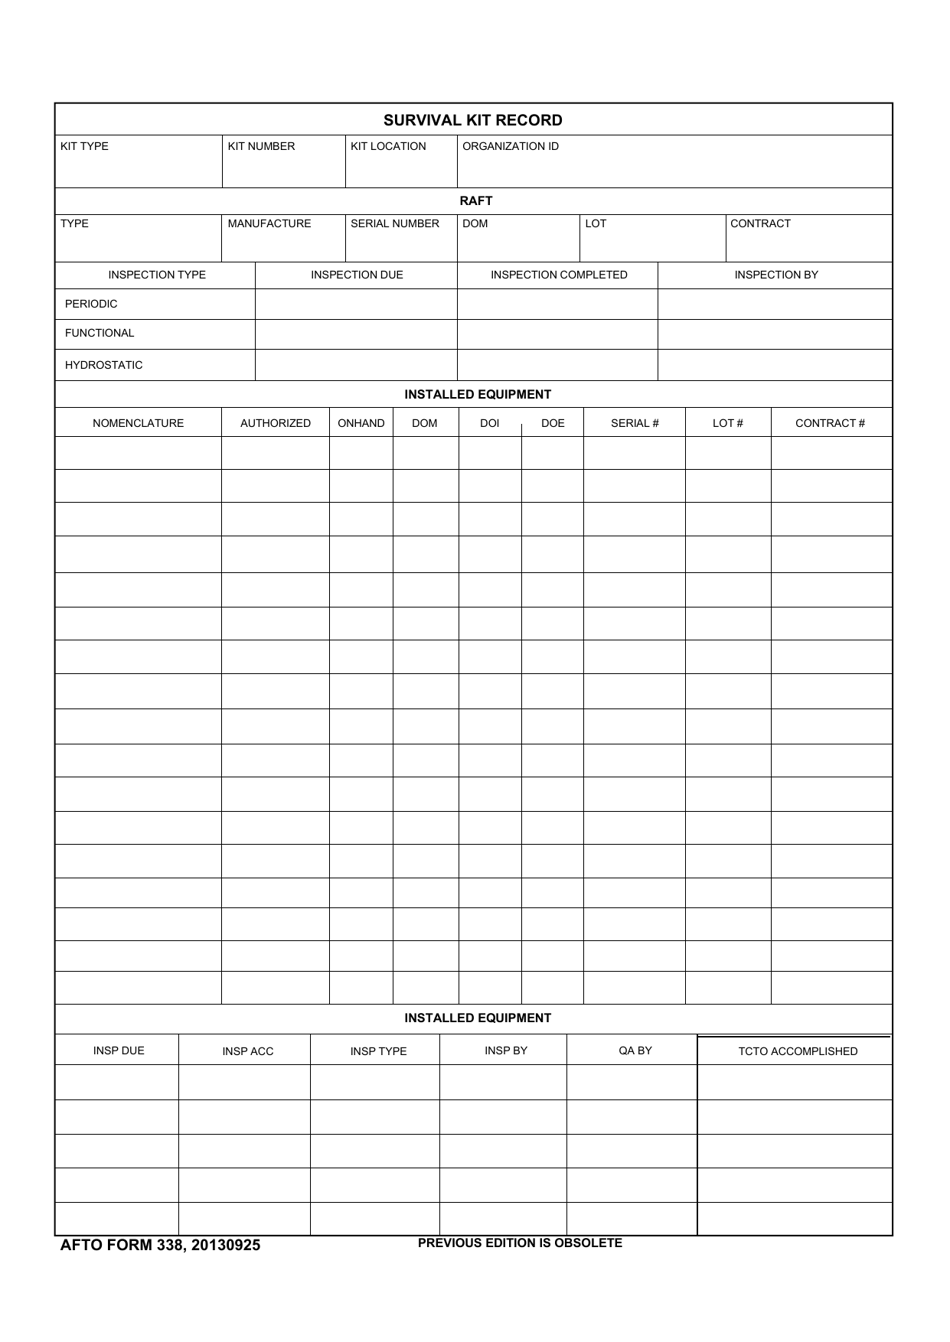 AFTO Form 338 Survival Kit Record, Page 1